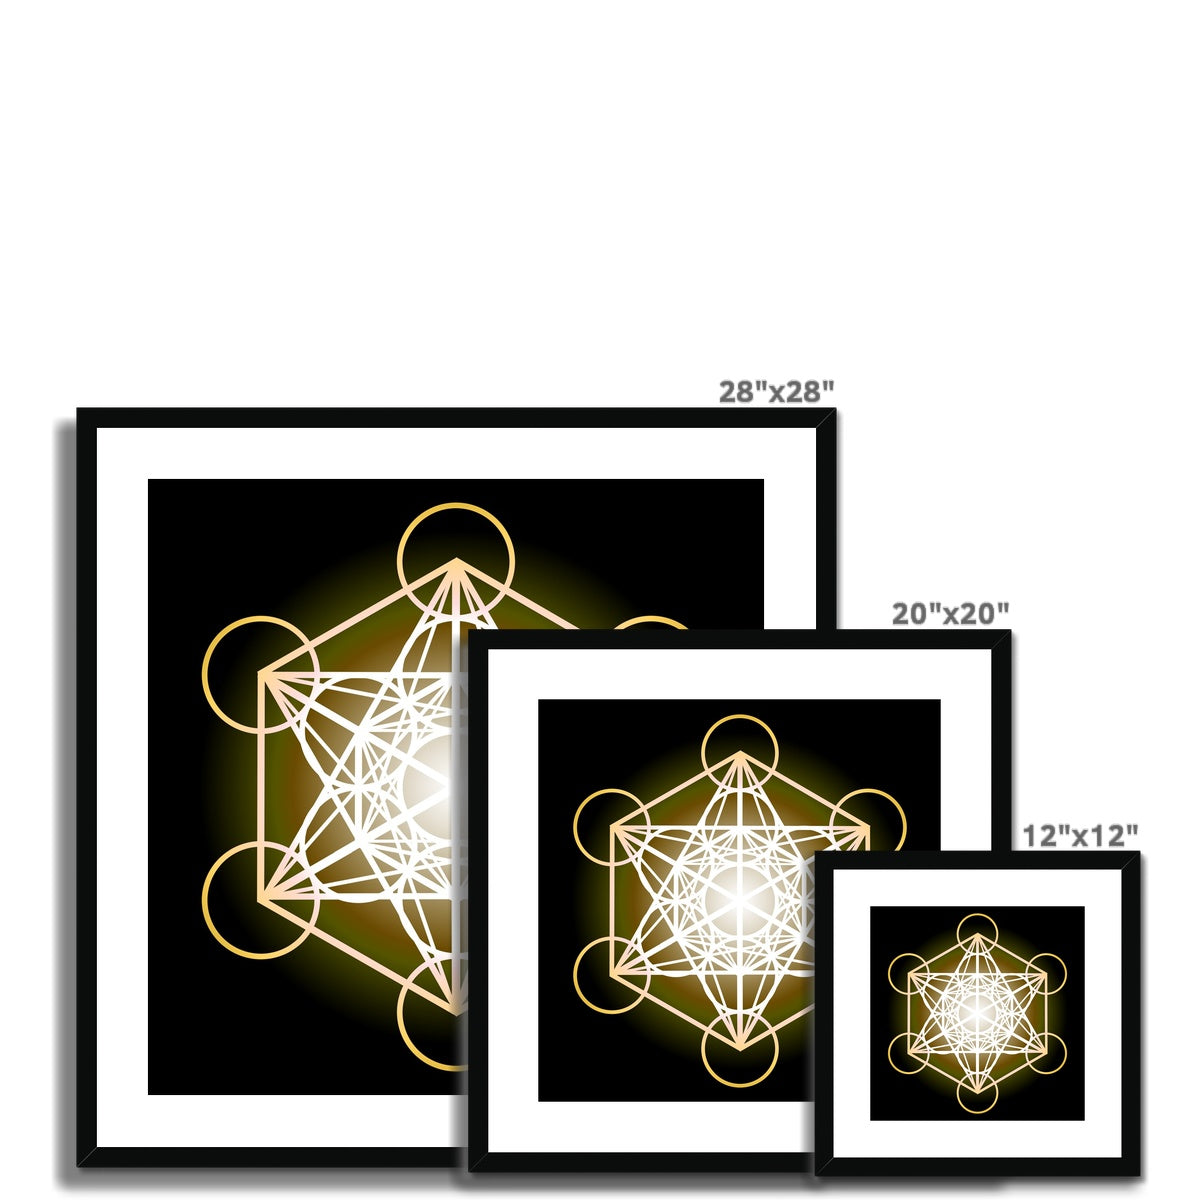 Metatrons Cube in Gold Framed & Mounted Print